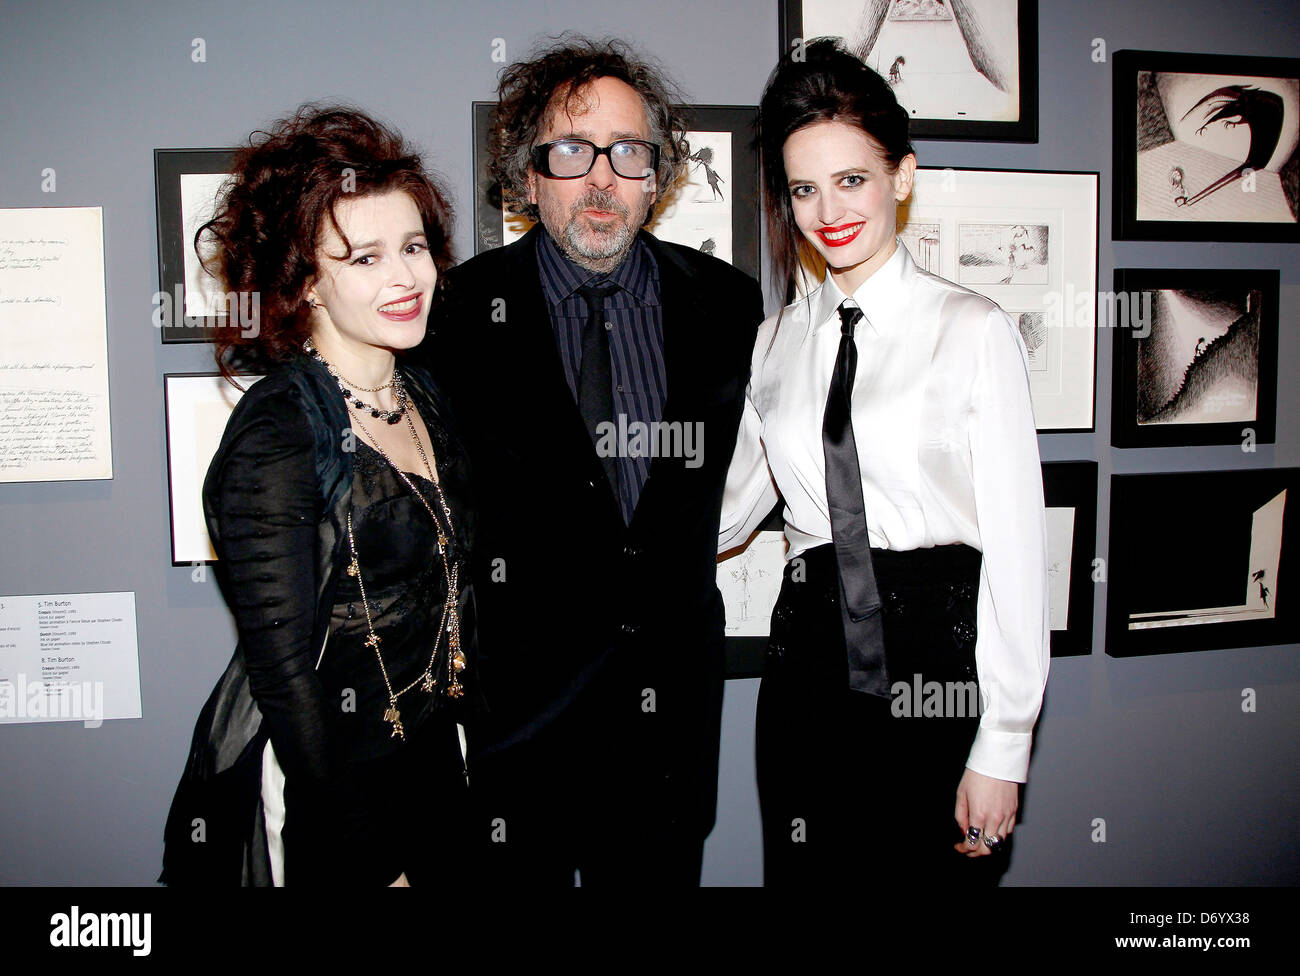 Helena Bonham Carter, Tim Burton and Eva Green at the opening of the new Tim  Burton Exhibition at the Cinematheque francaise - Cinema Museum in Paris,  France on March 3, 2012. The